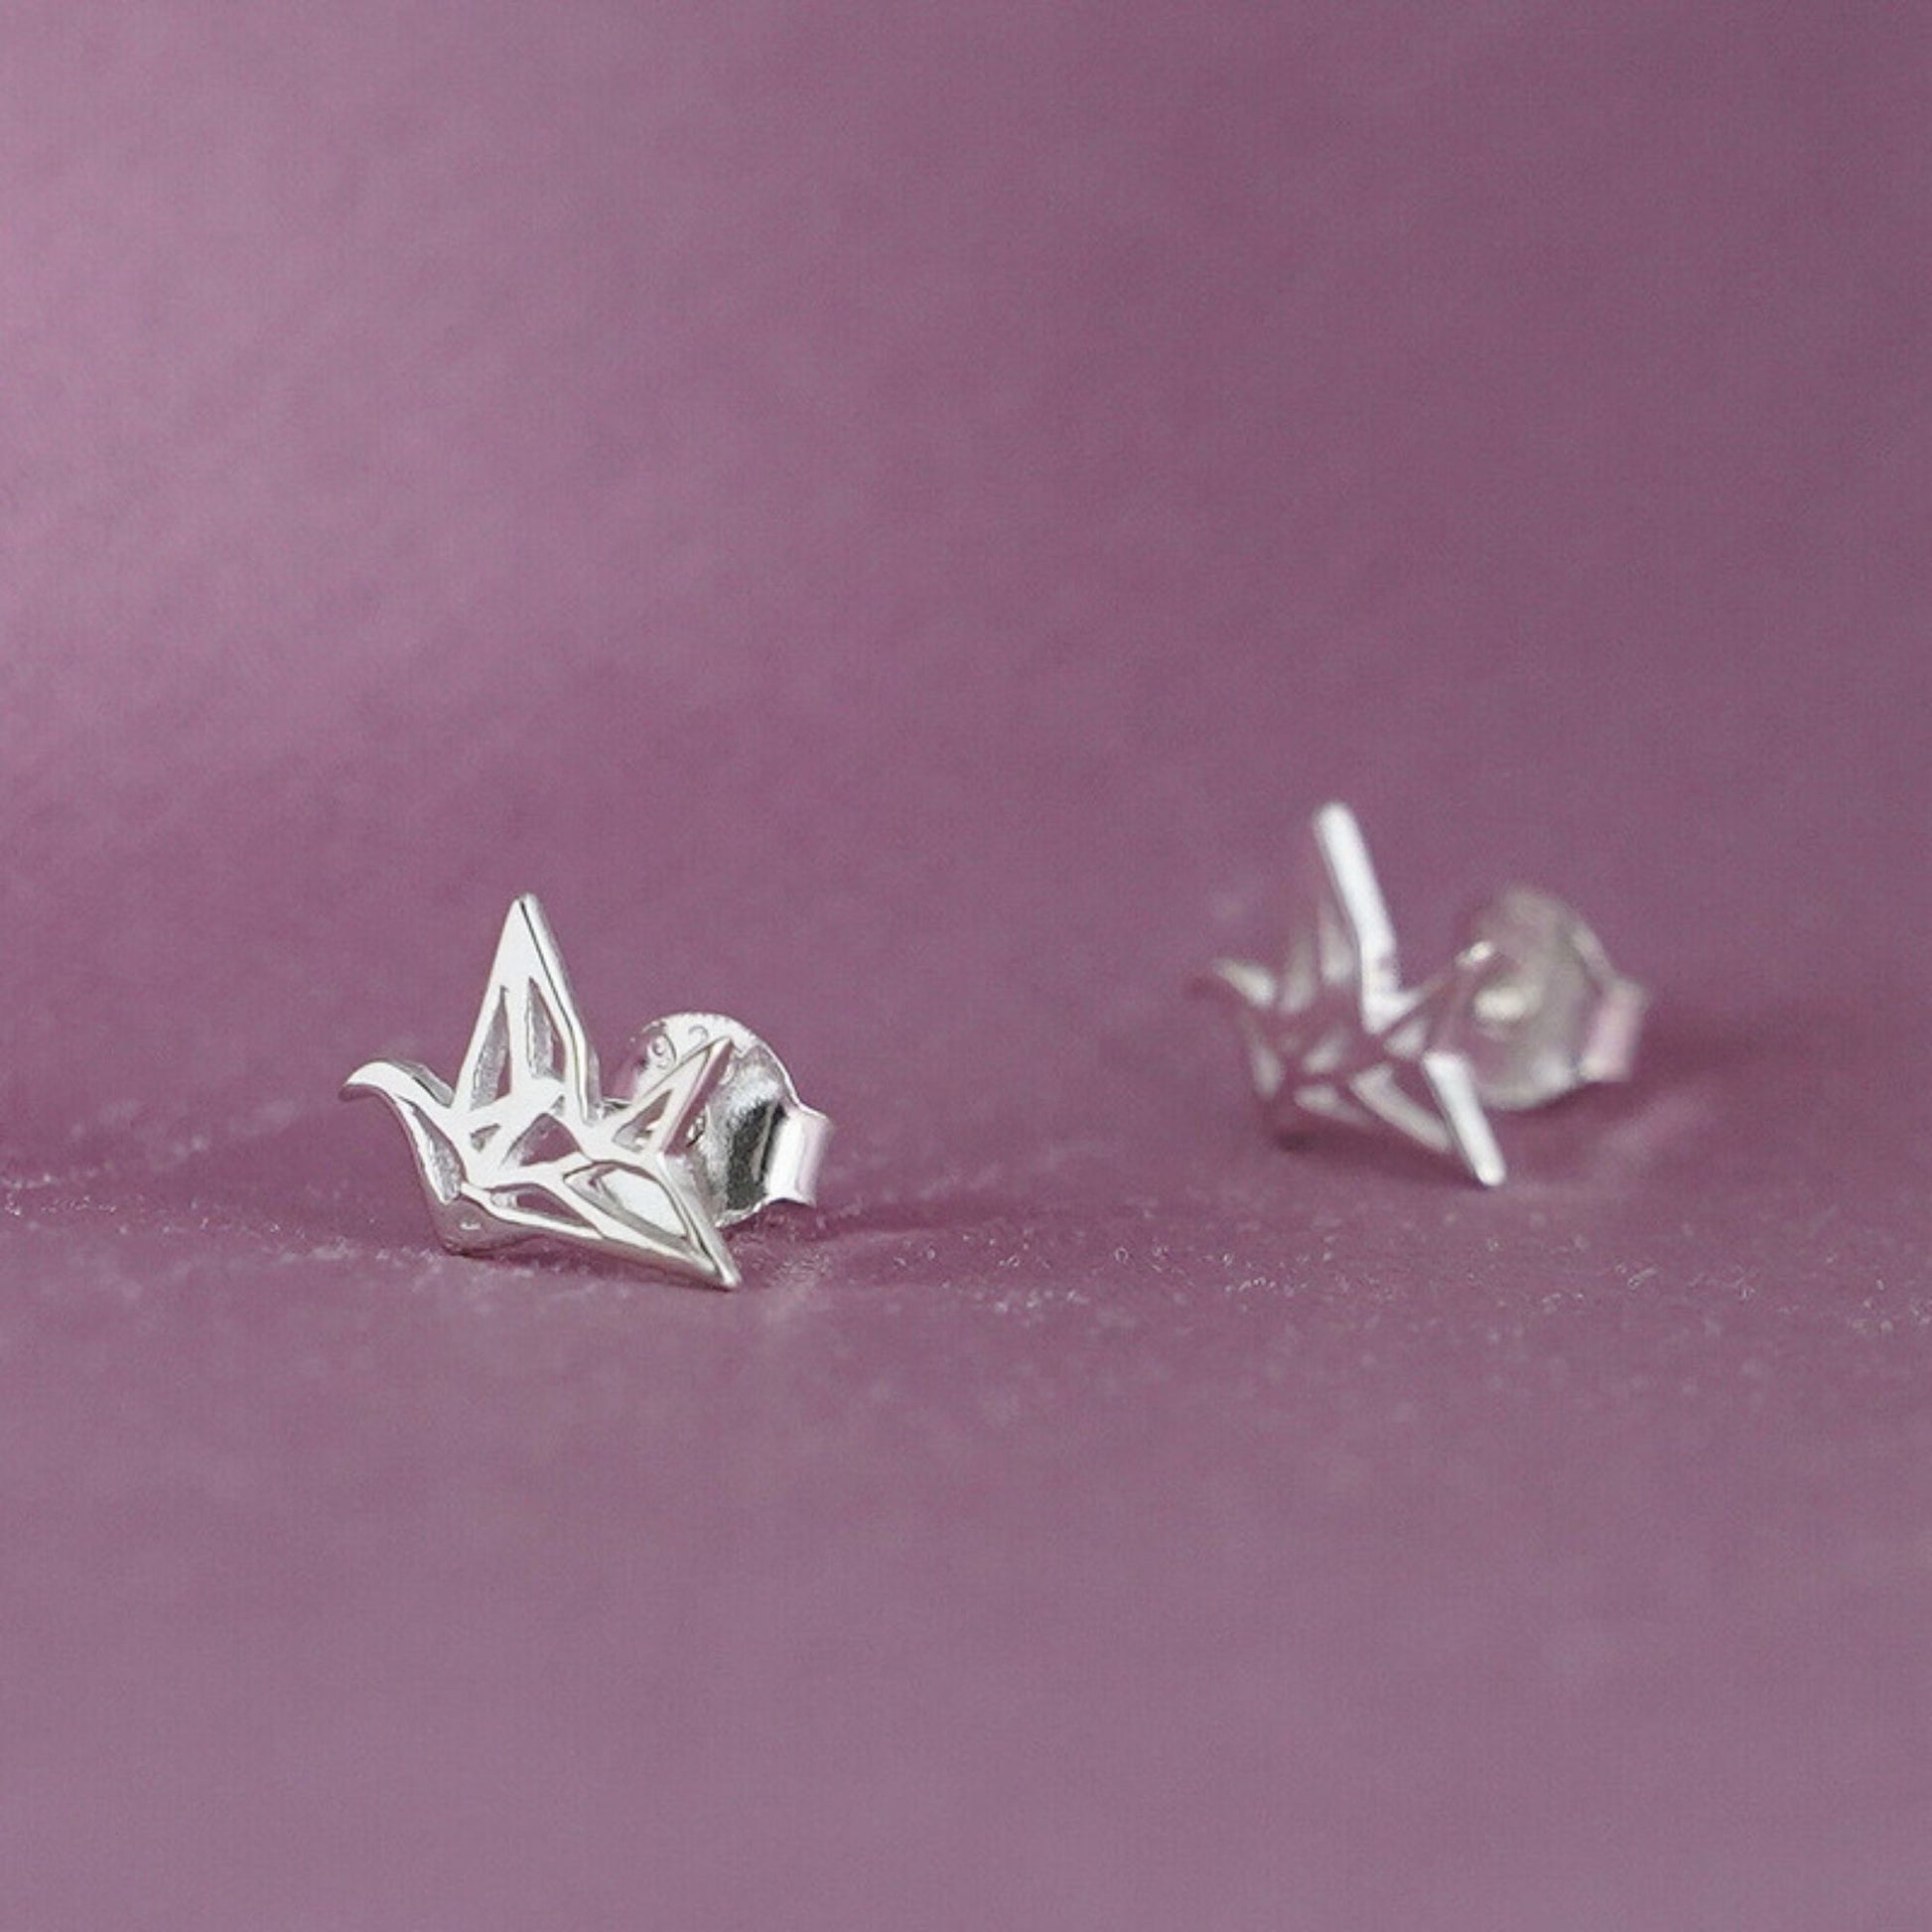 Sterling Silver Origami Crane Stud Earrings with Shiny Polished Finish - sugarkittenlondon